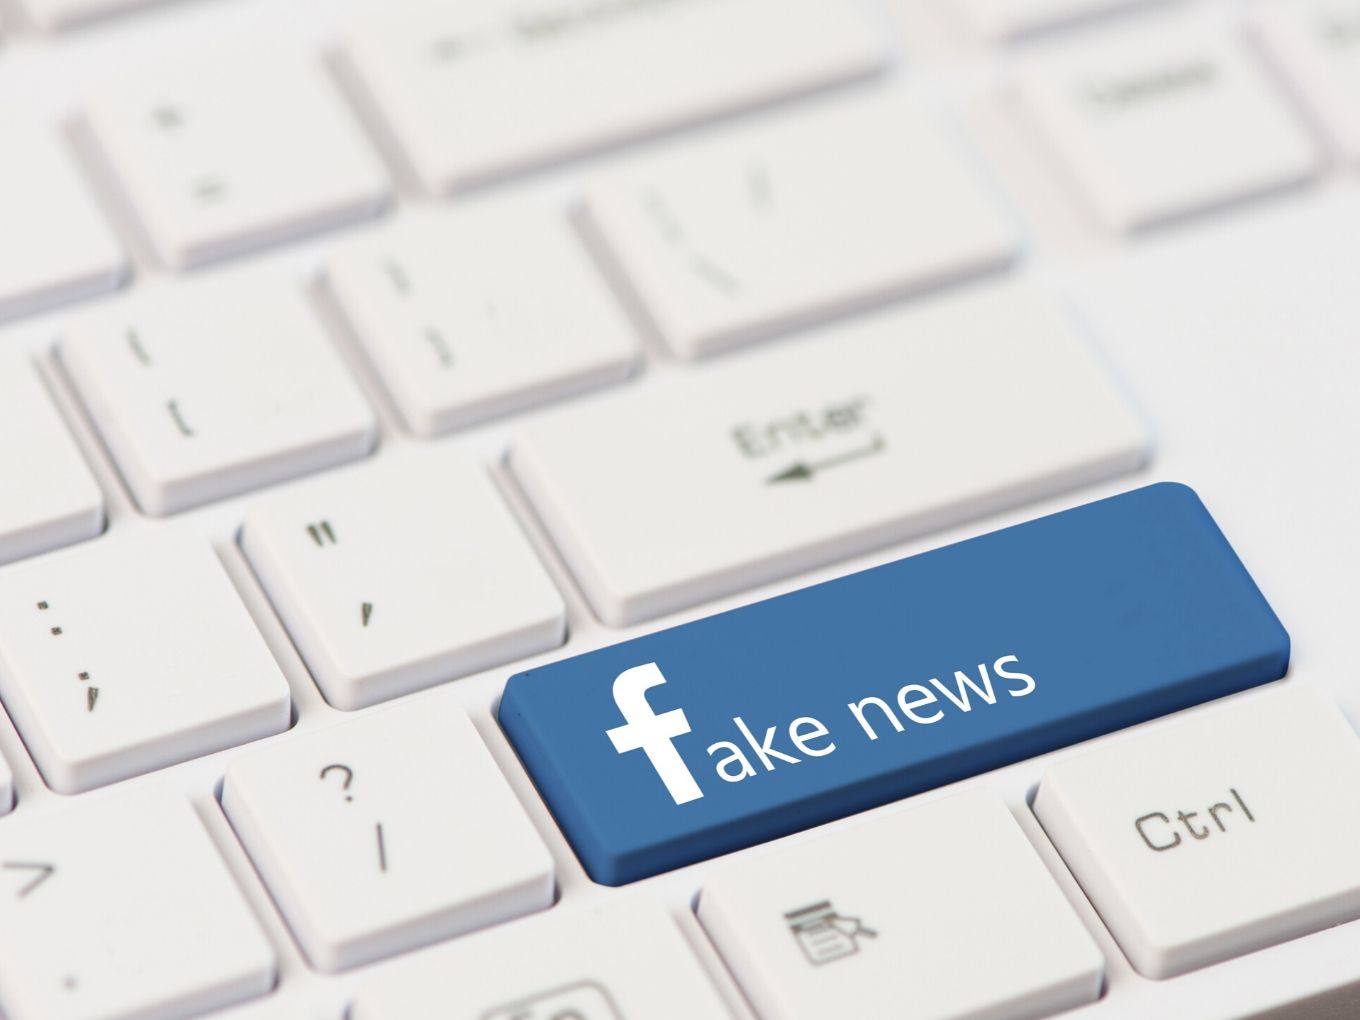 Facebook Makes Fake News Alerts More Prominent For Users In India